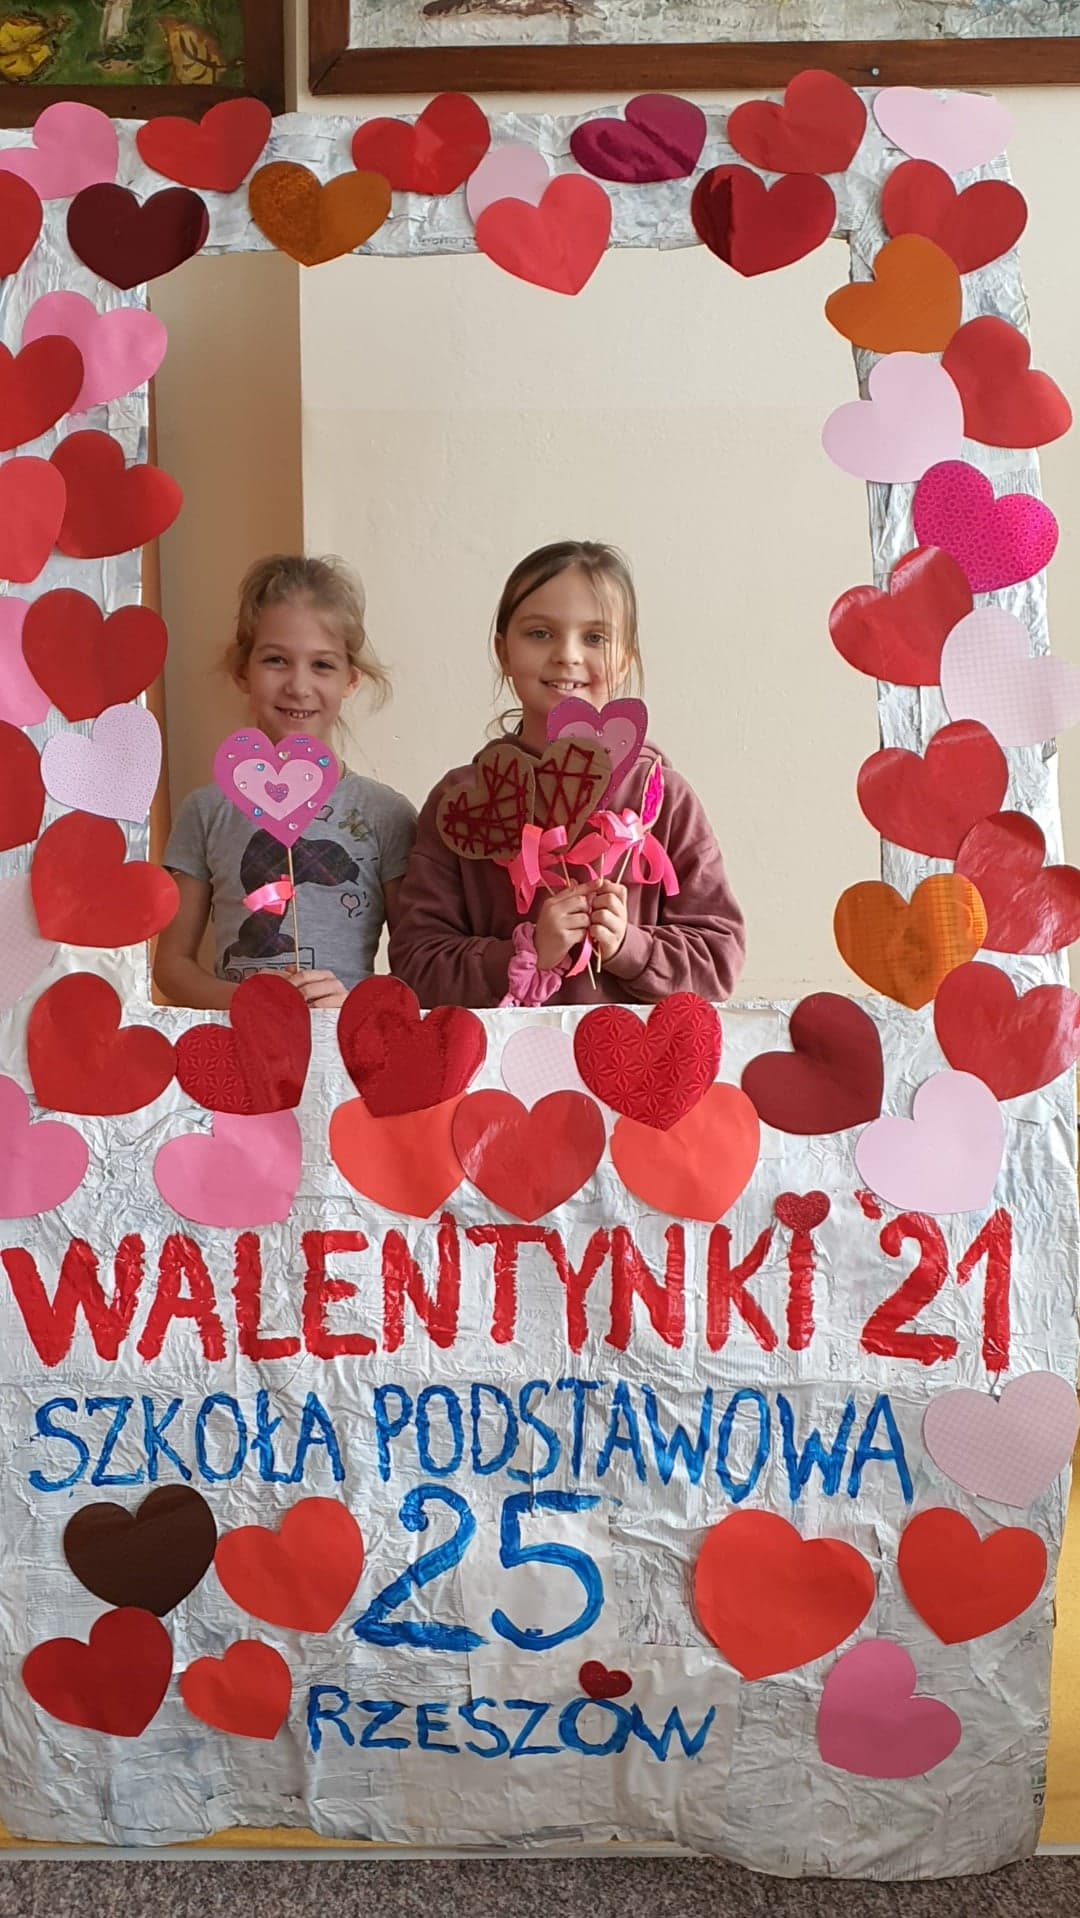 You are currently viewing Walentynki 2021